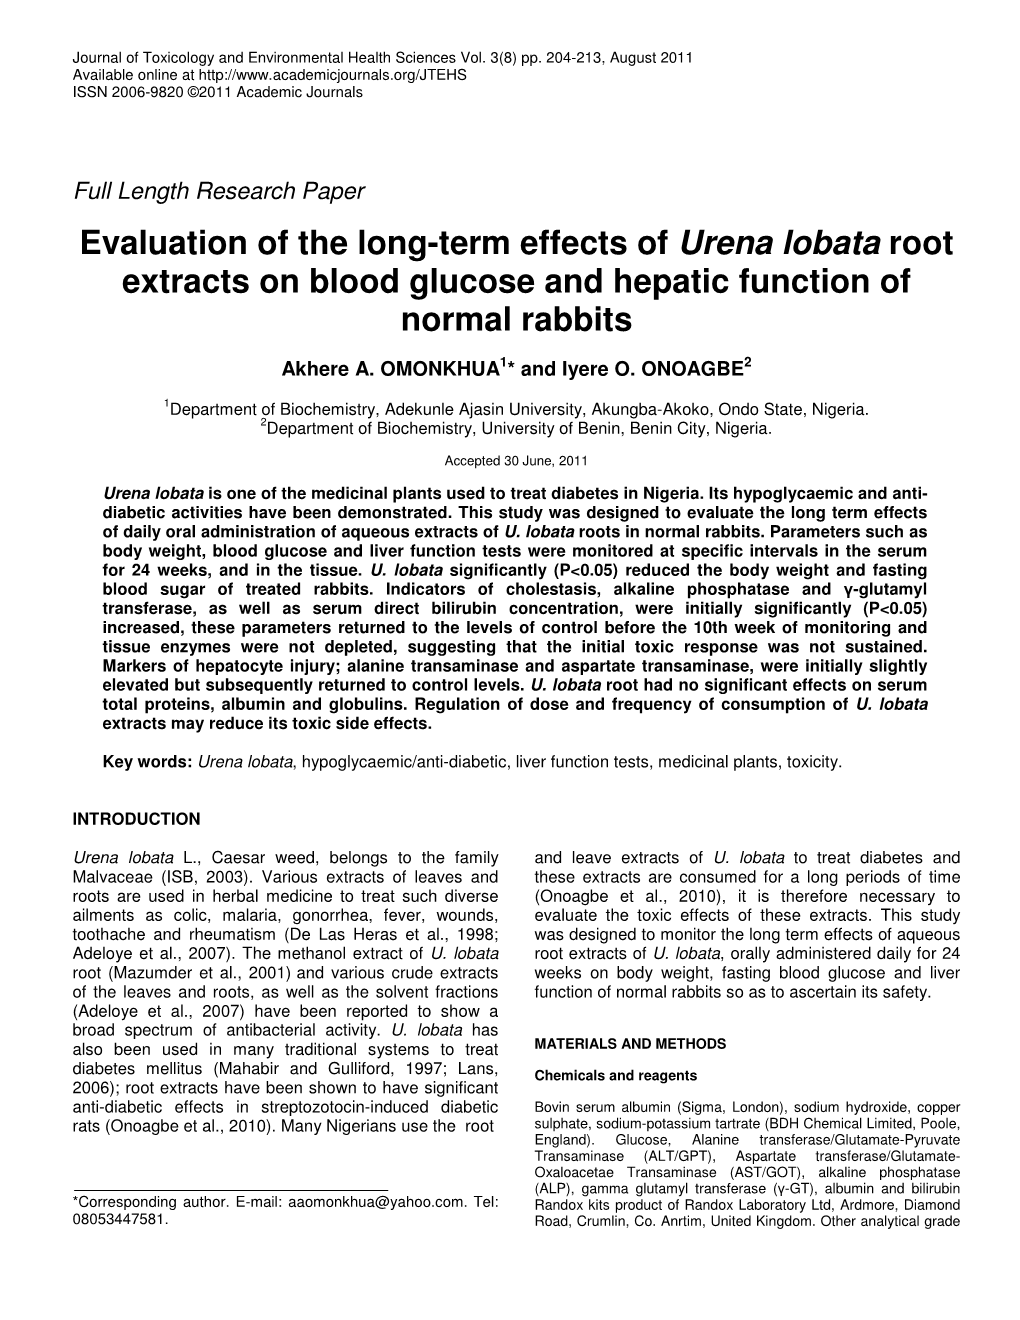 Evaluation of the Long-Term Effects of Urena Lobata Root Extracts on Blood Glucose and Hepatic Function of Normal Rabbits